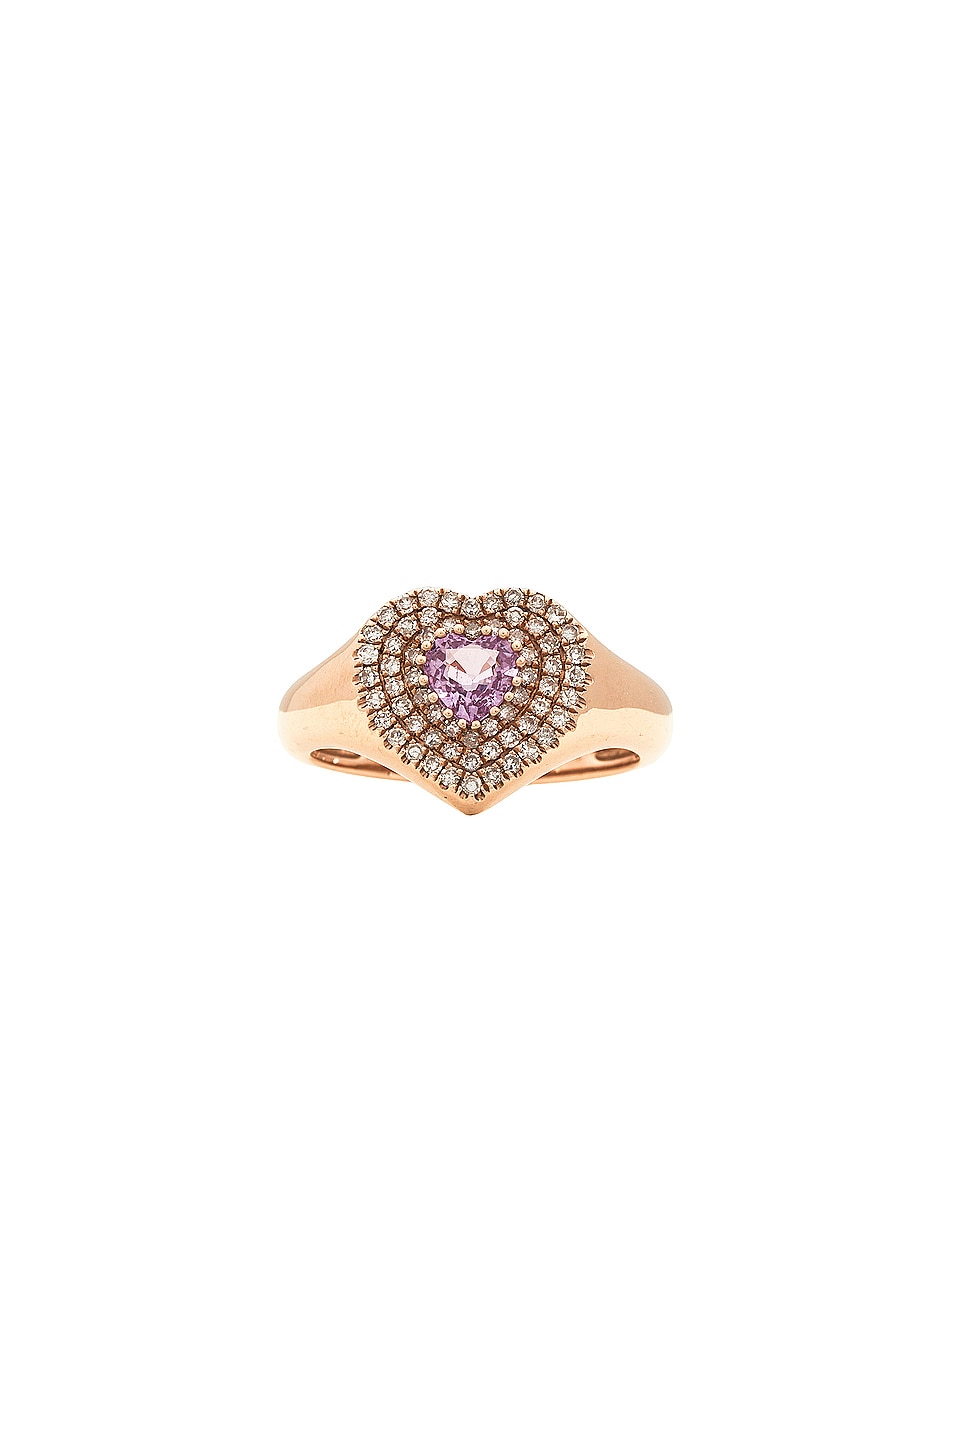 Image 1 of Siena Jewelry Heart Pinky Ring in 14k Yellow Gold, Diamond, & Pink Sapphire